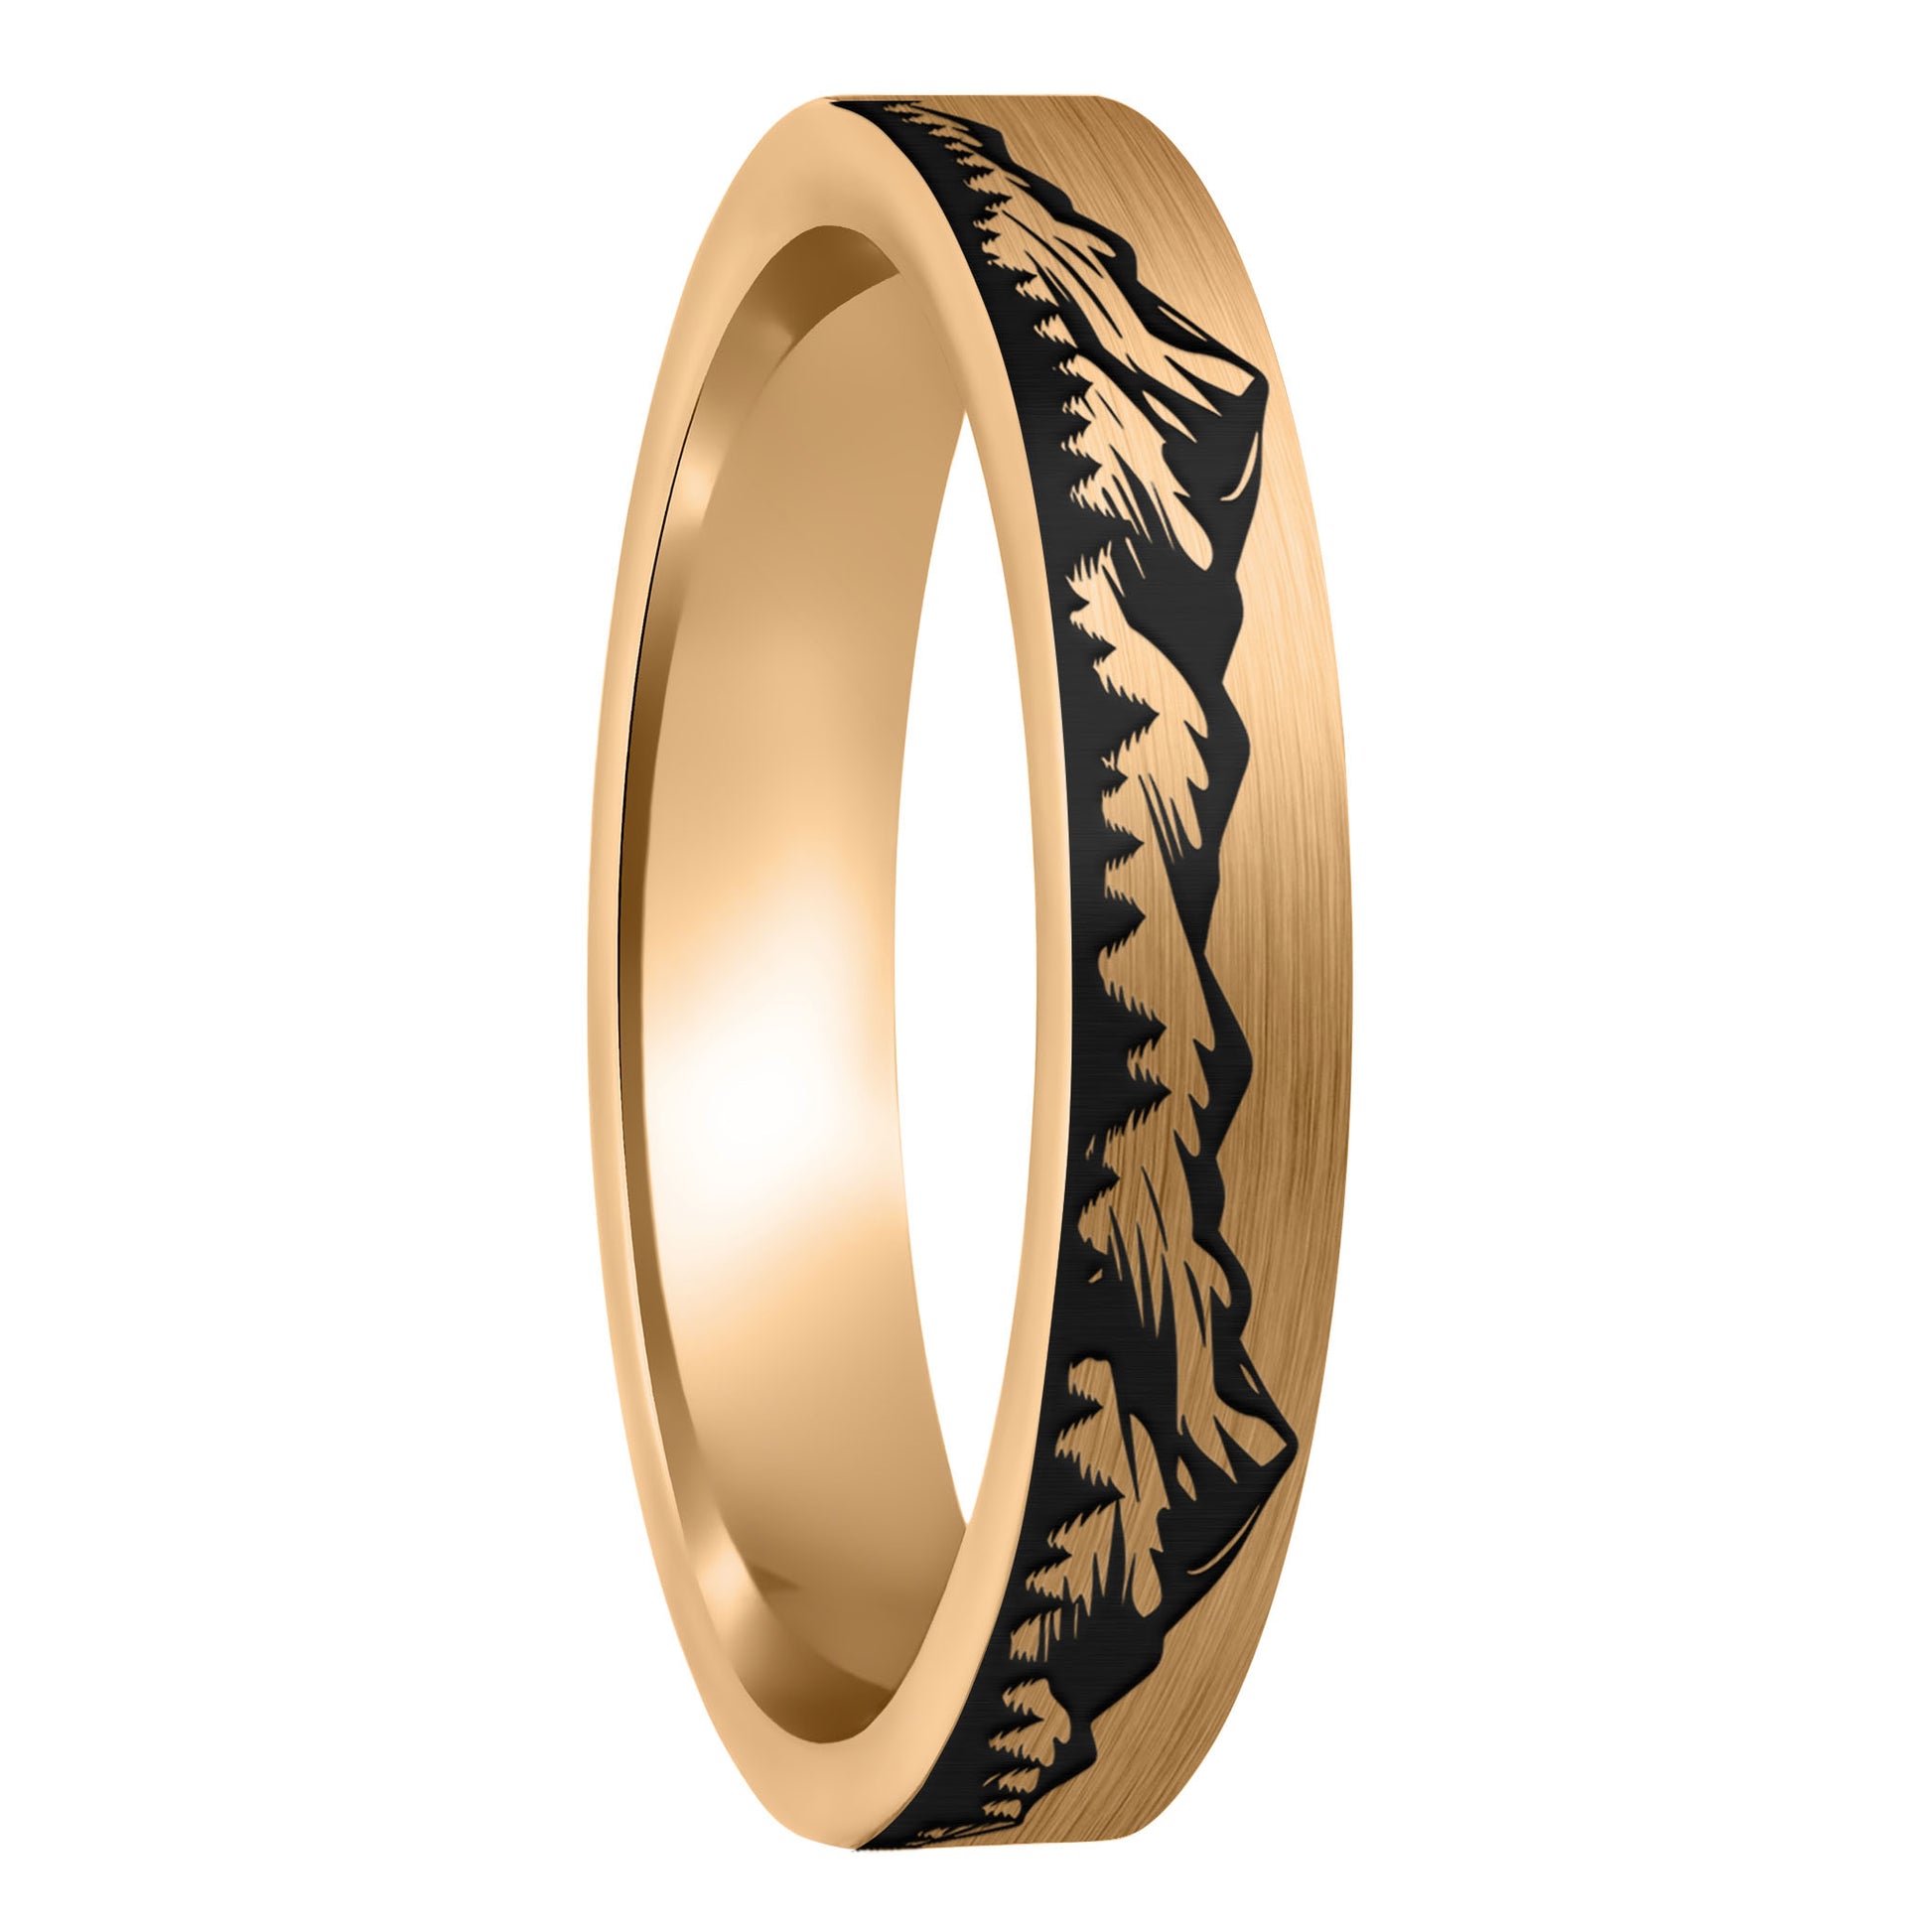 A mountain range forest brushed rose gold tungsten women's wedding band displayed on a plain white background.